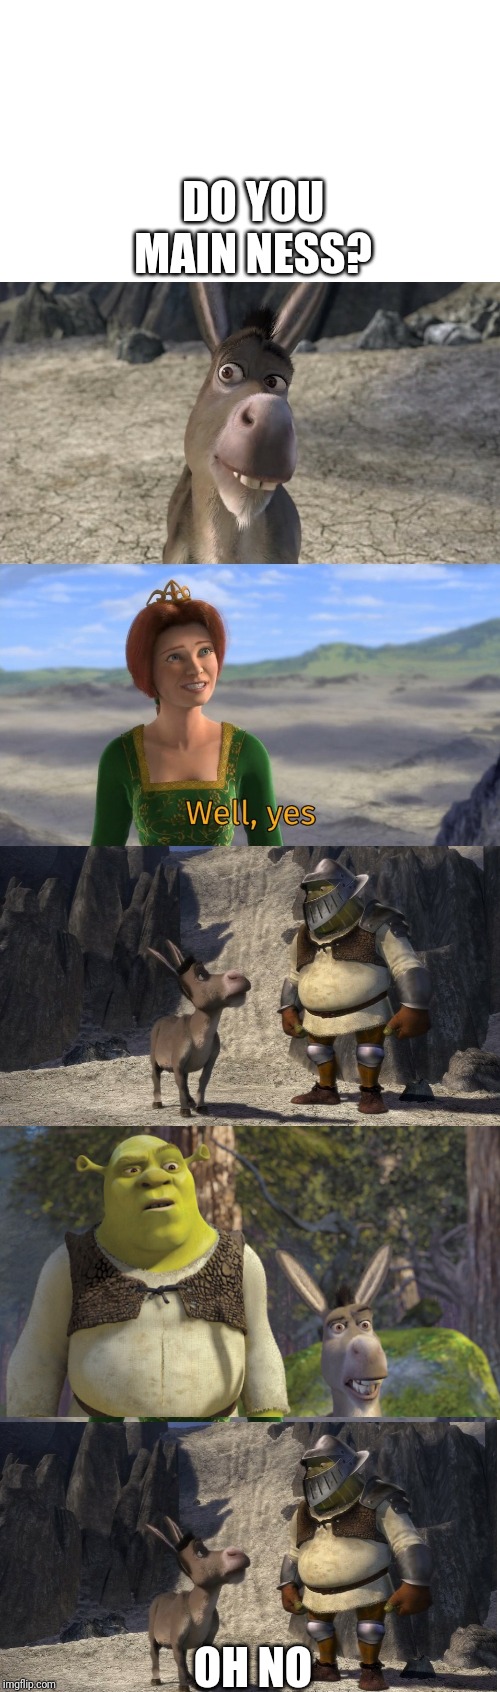 Shrek well yes | DO YOU MAIN NESS? OH NO | image tagged in shrek well yes | made w/ Imgflip meme maker